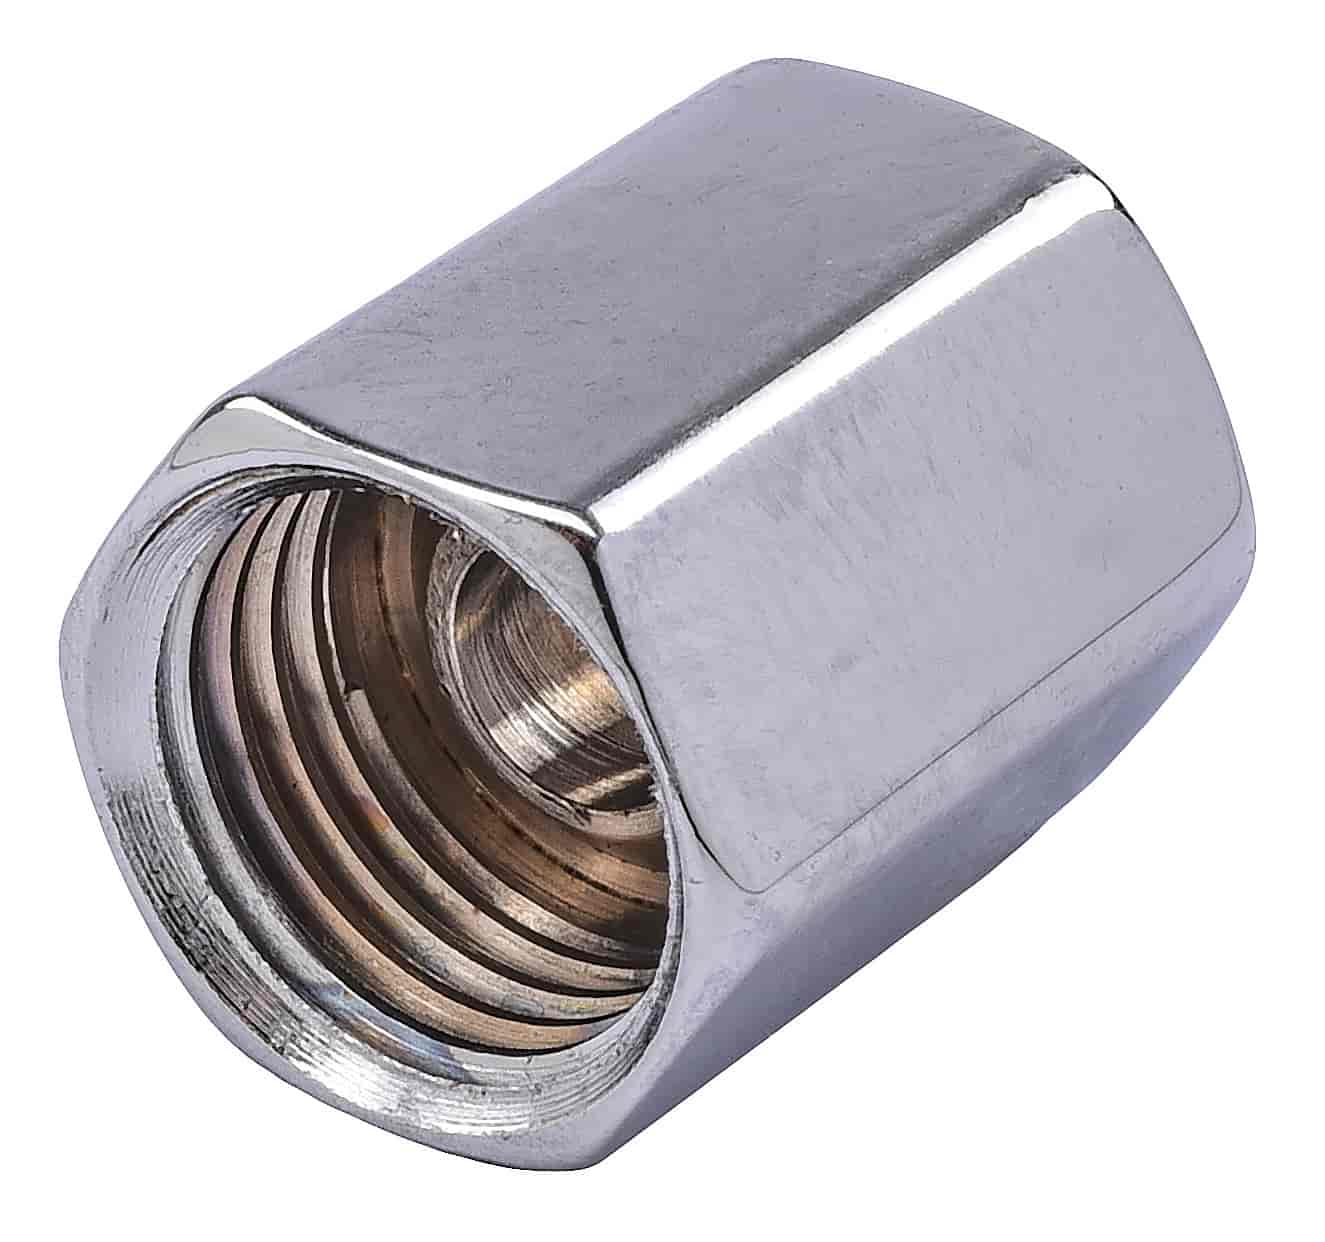 Chrome Union Fitting 7/16 in. -20 Inverted Flare Female x 7/16 in. -20 Inverted Flare Female